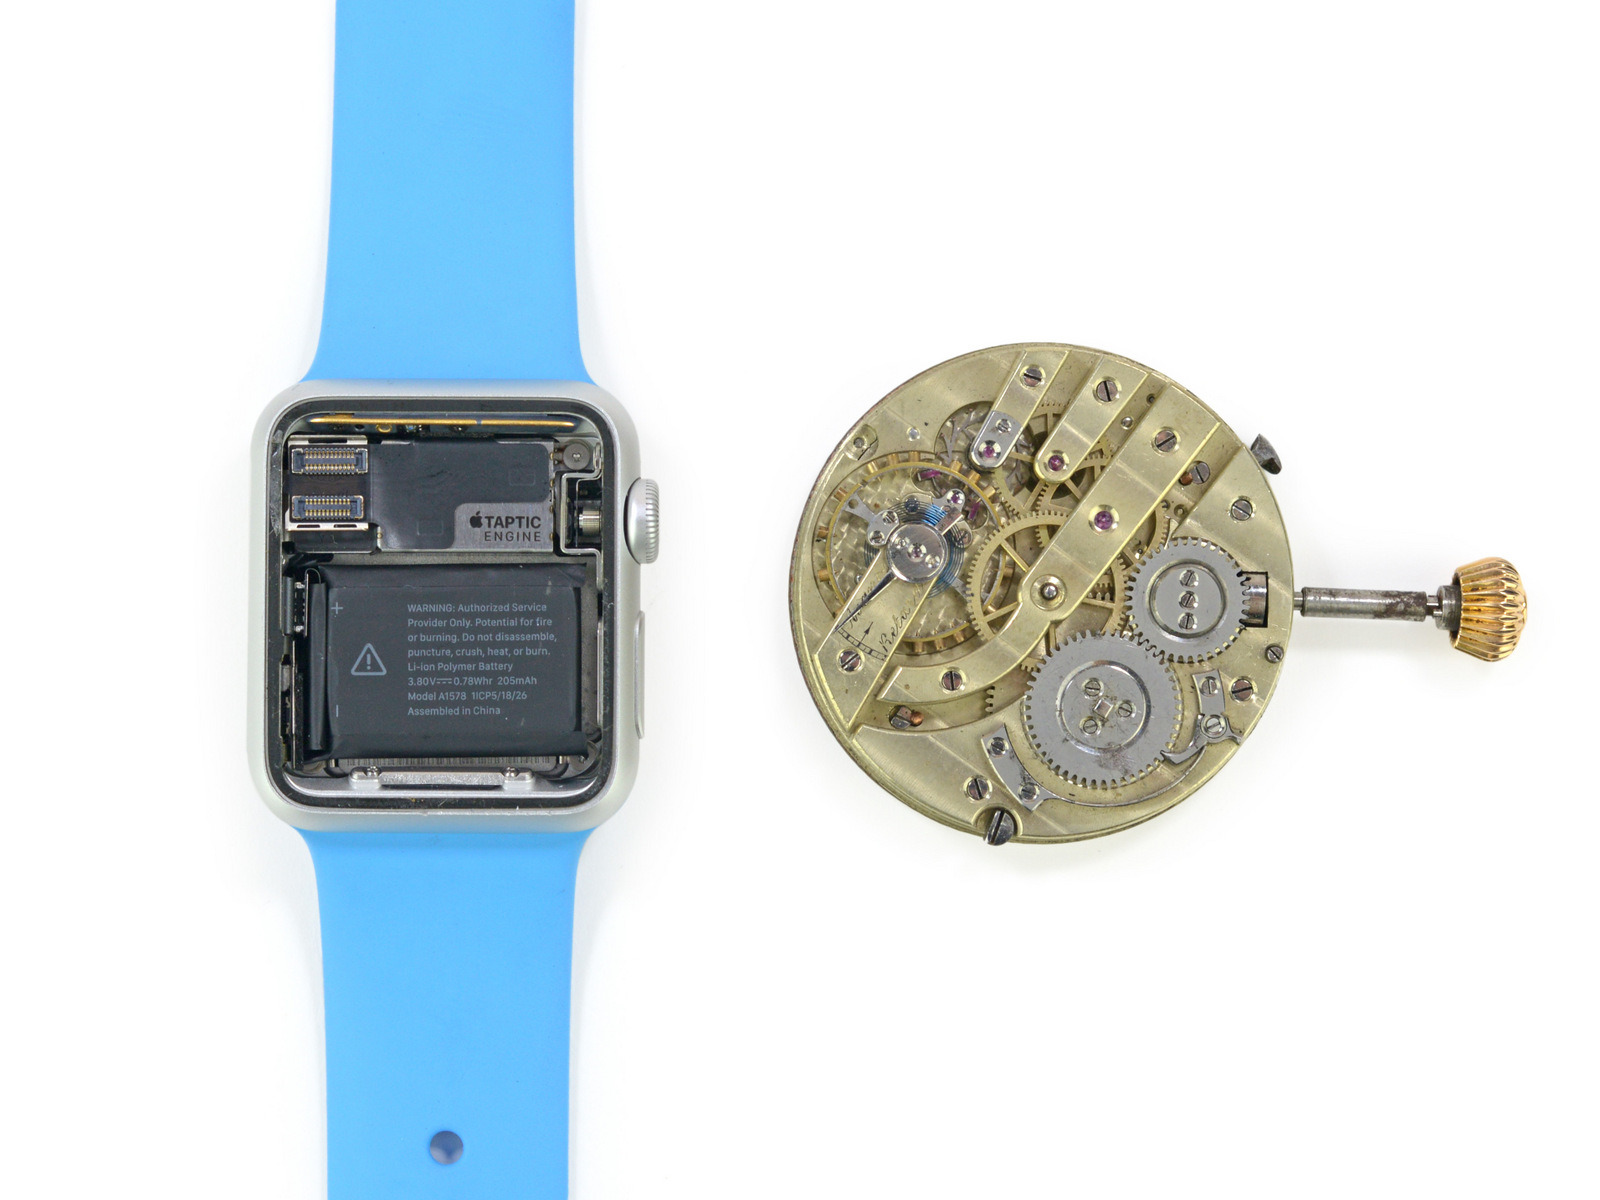 Apple Watch delivery slowed by faulty part, report says